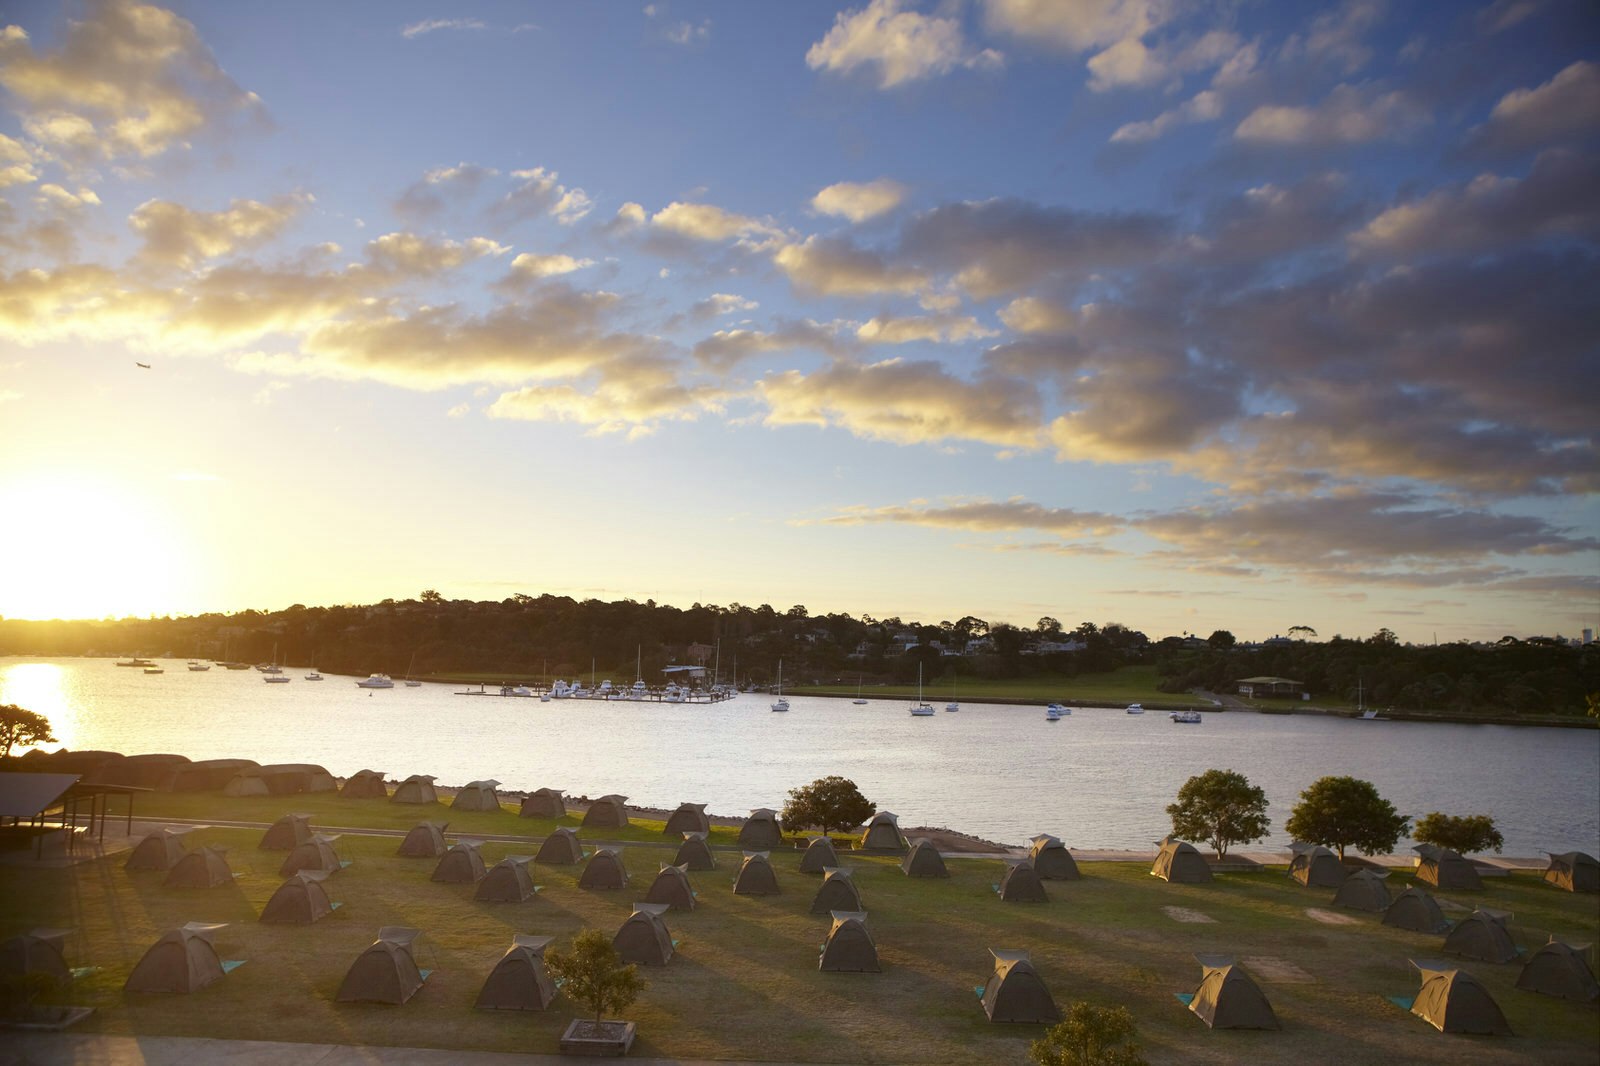 Campsite on Cockatoo Island overlooking harbour at sunset.